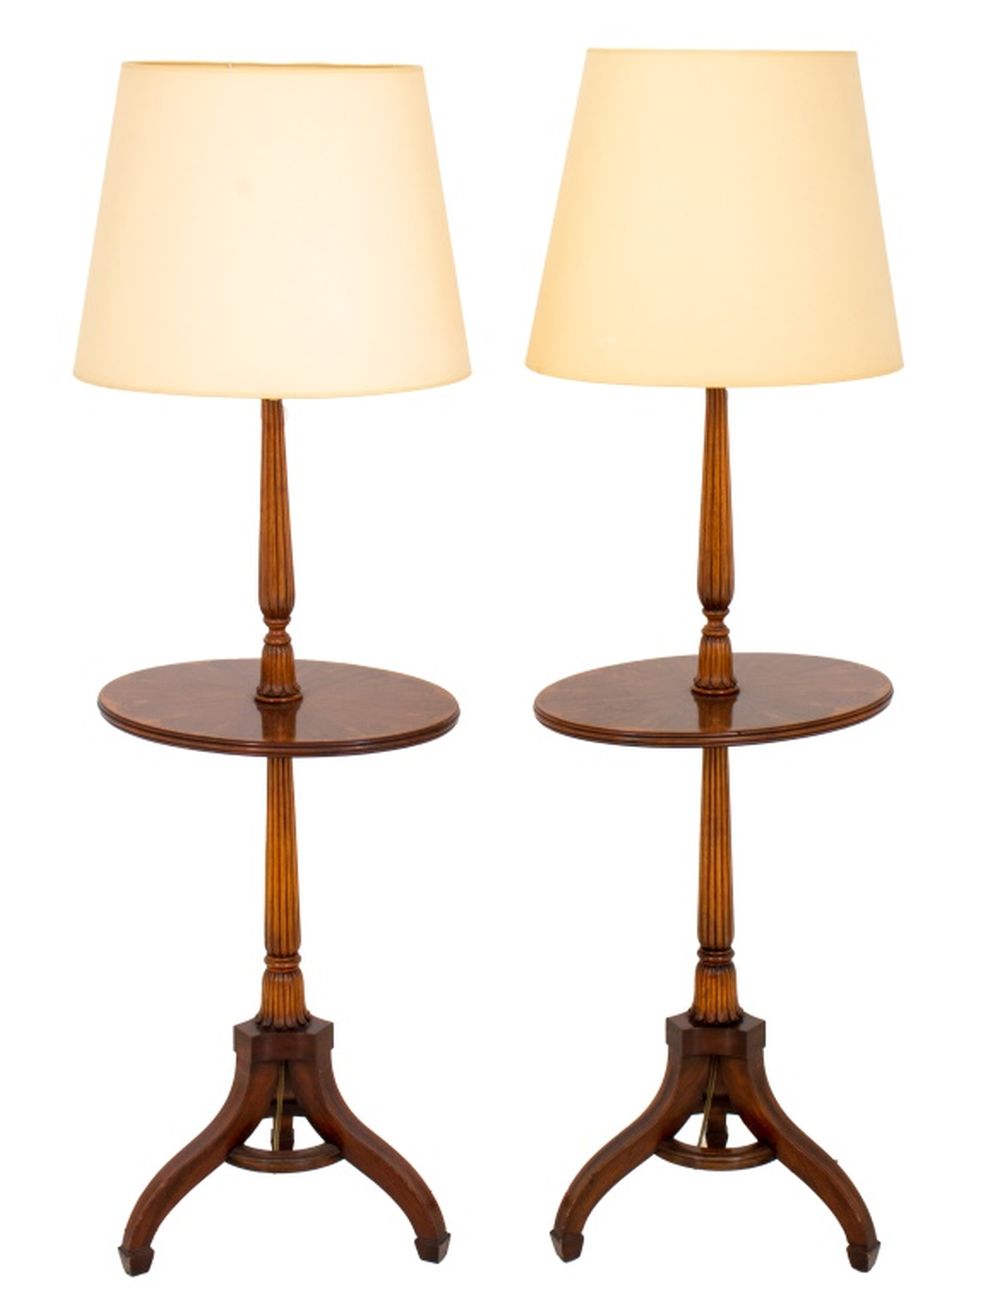 SHERATON STYLE STANDING LAMP TABLES  2bbd02